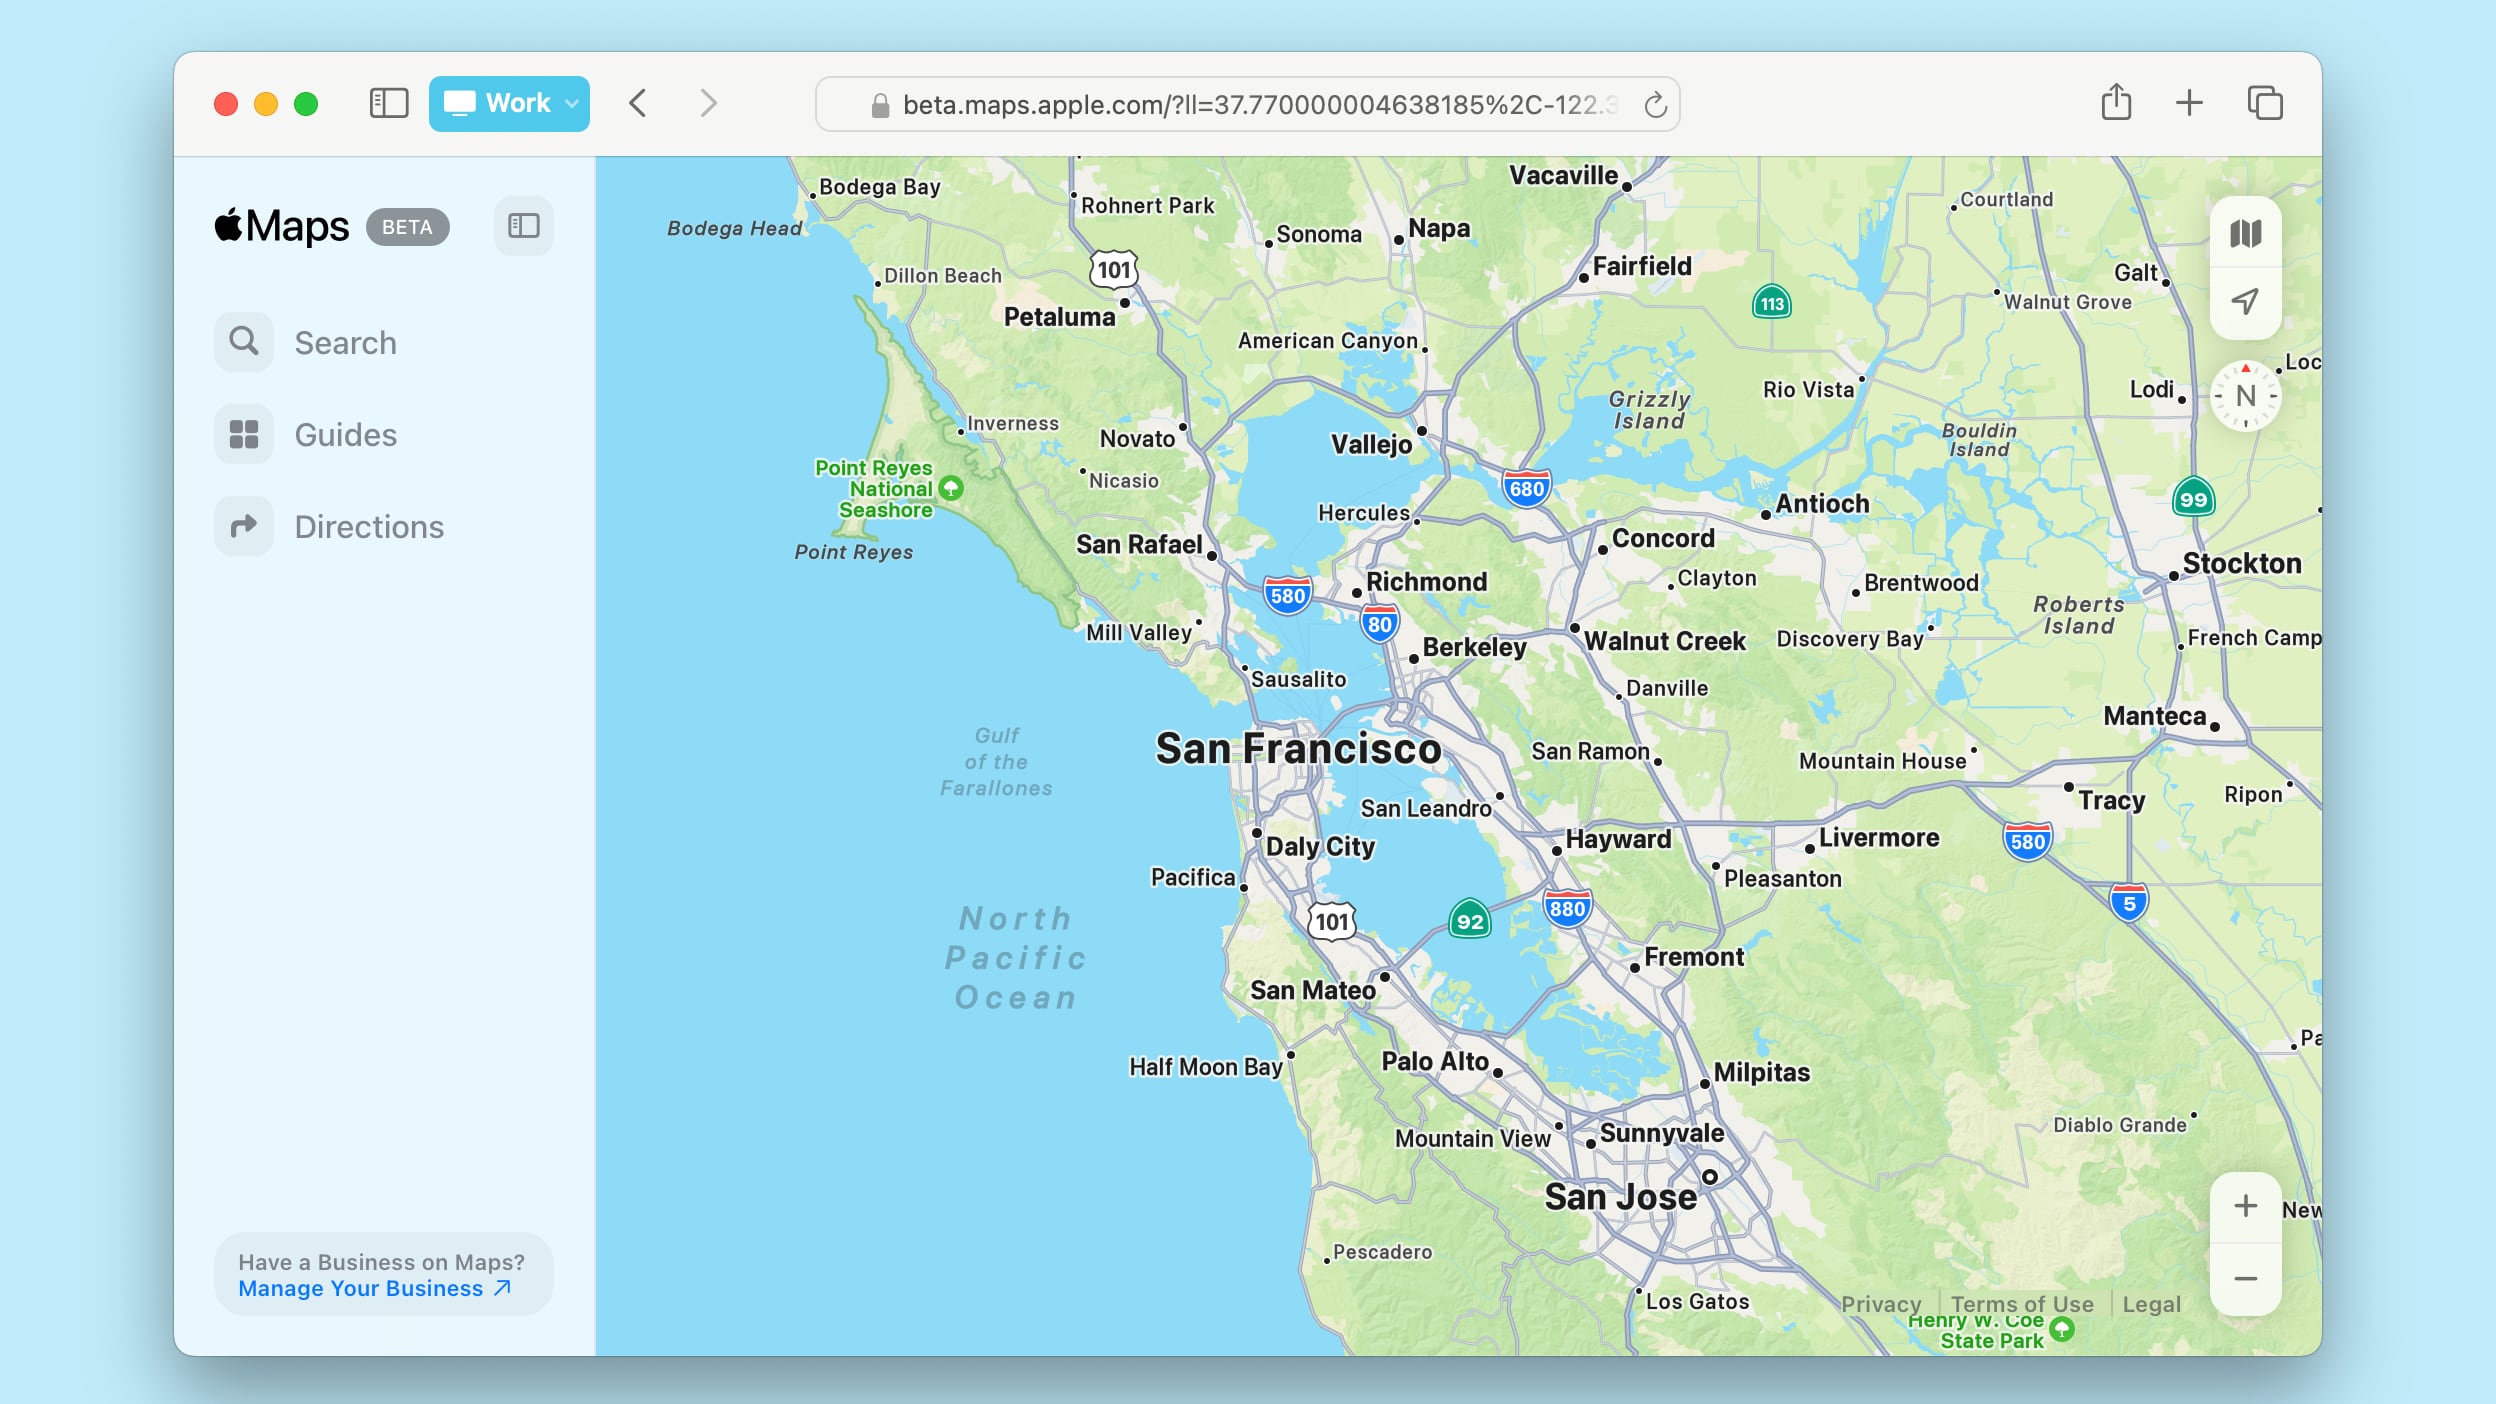 Apple Maps Now Available on the Web